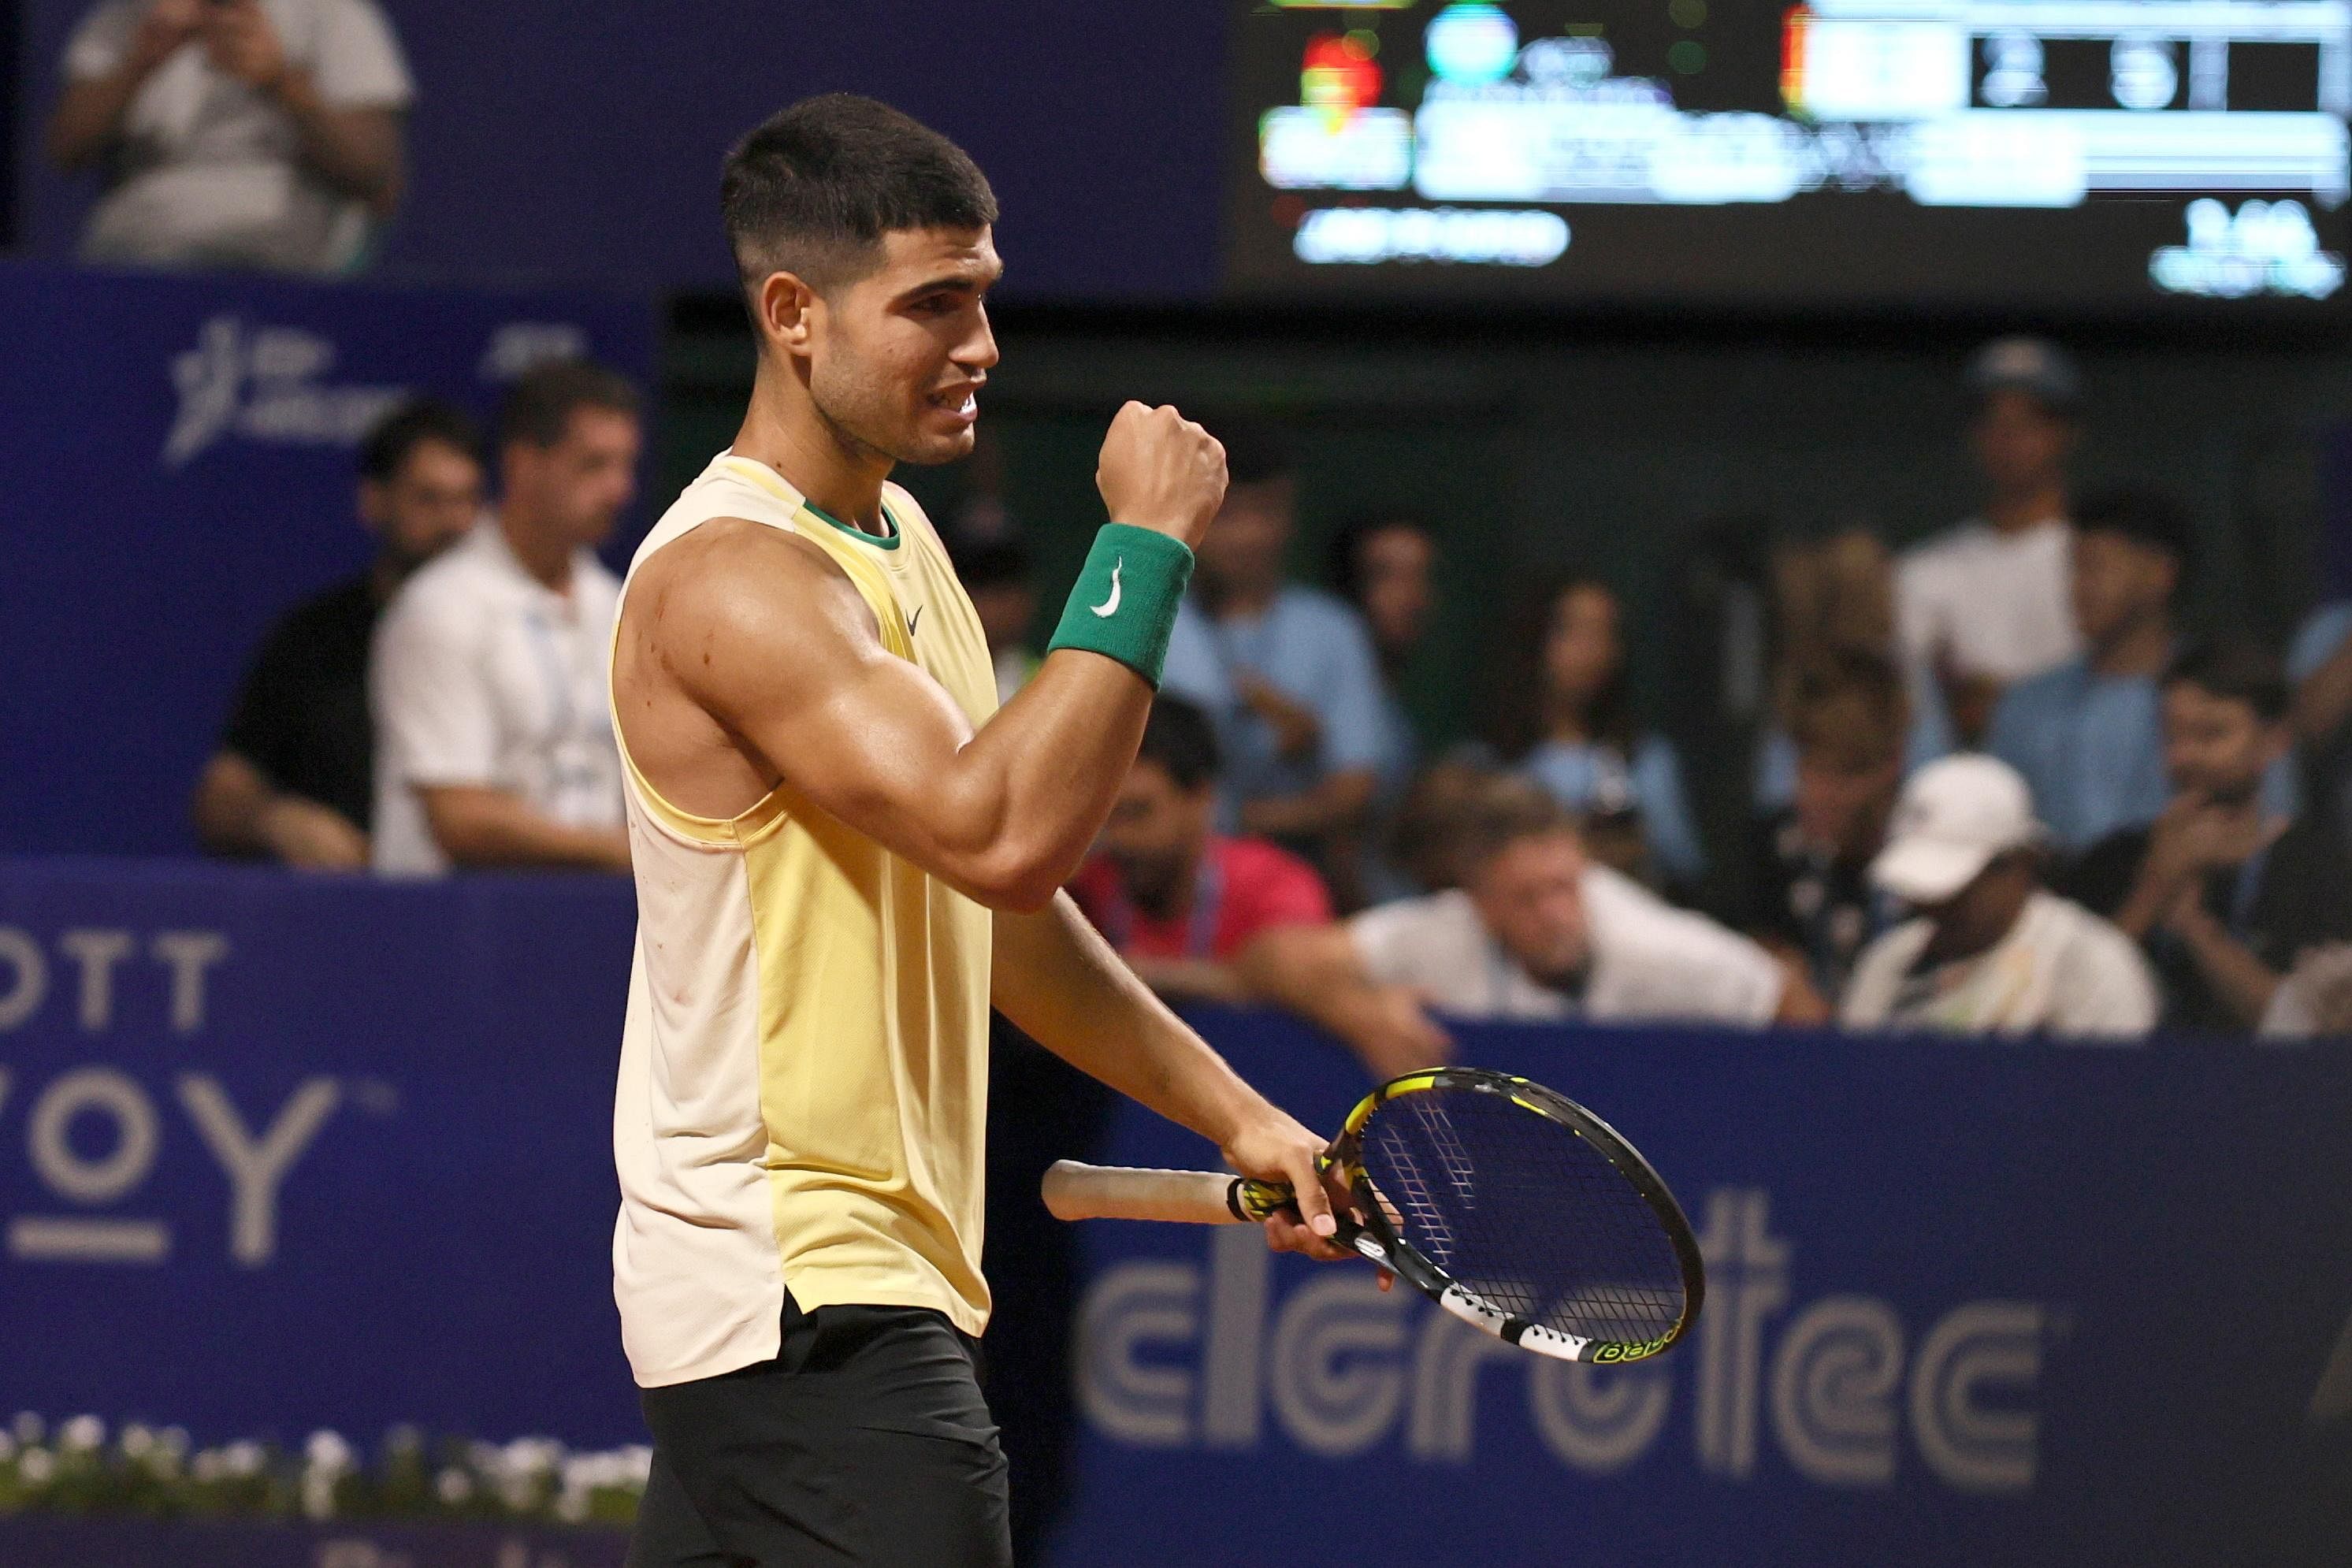 Carlos Alcaraz downs former 'pirate' in Buenos Aires tennis opener